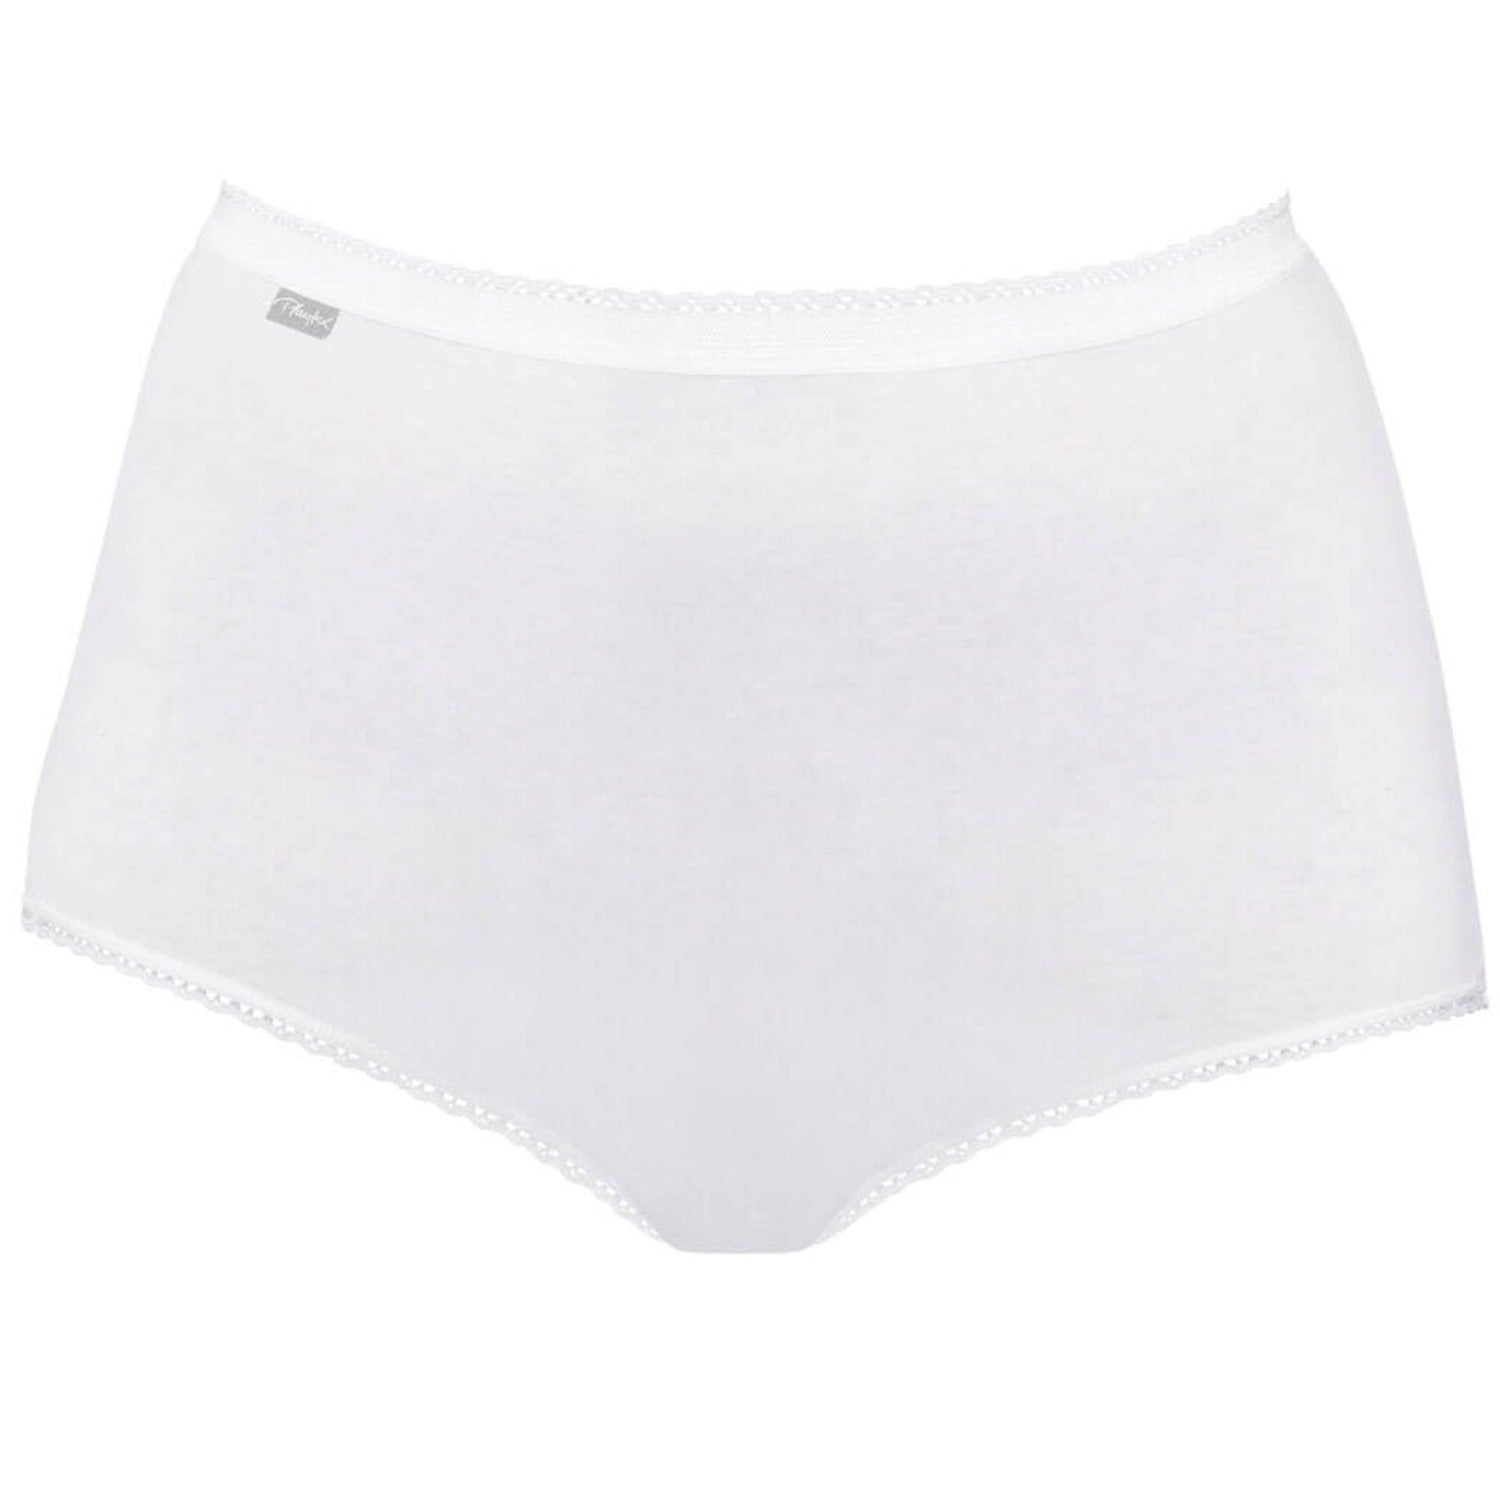 Playtex Maxi Brief 3 Pack - White 1 Shaws Department Stores